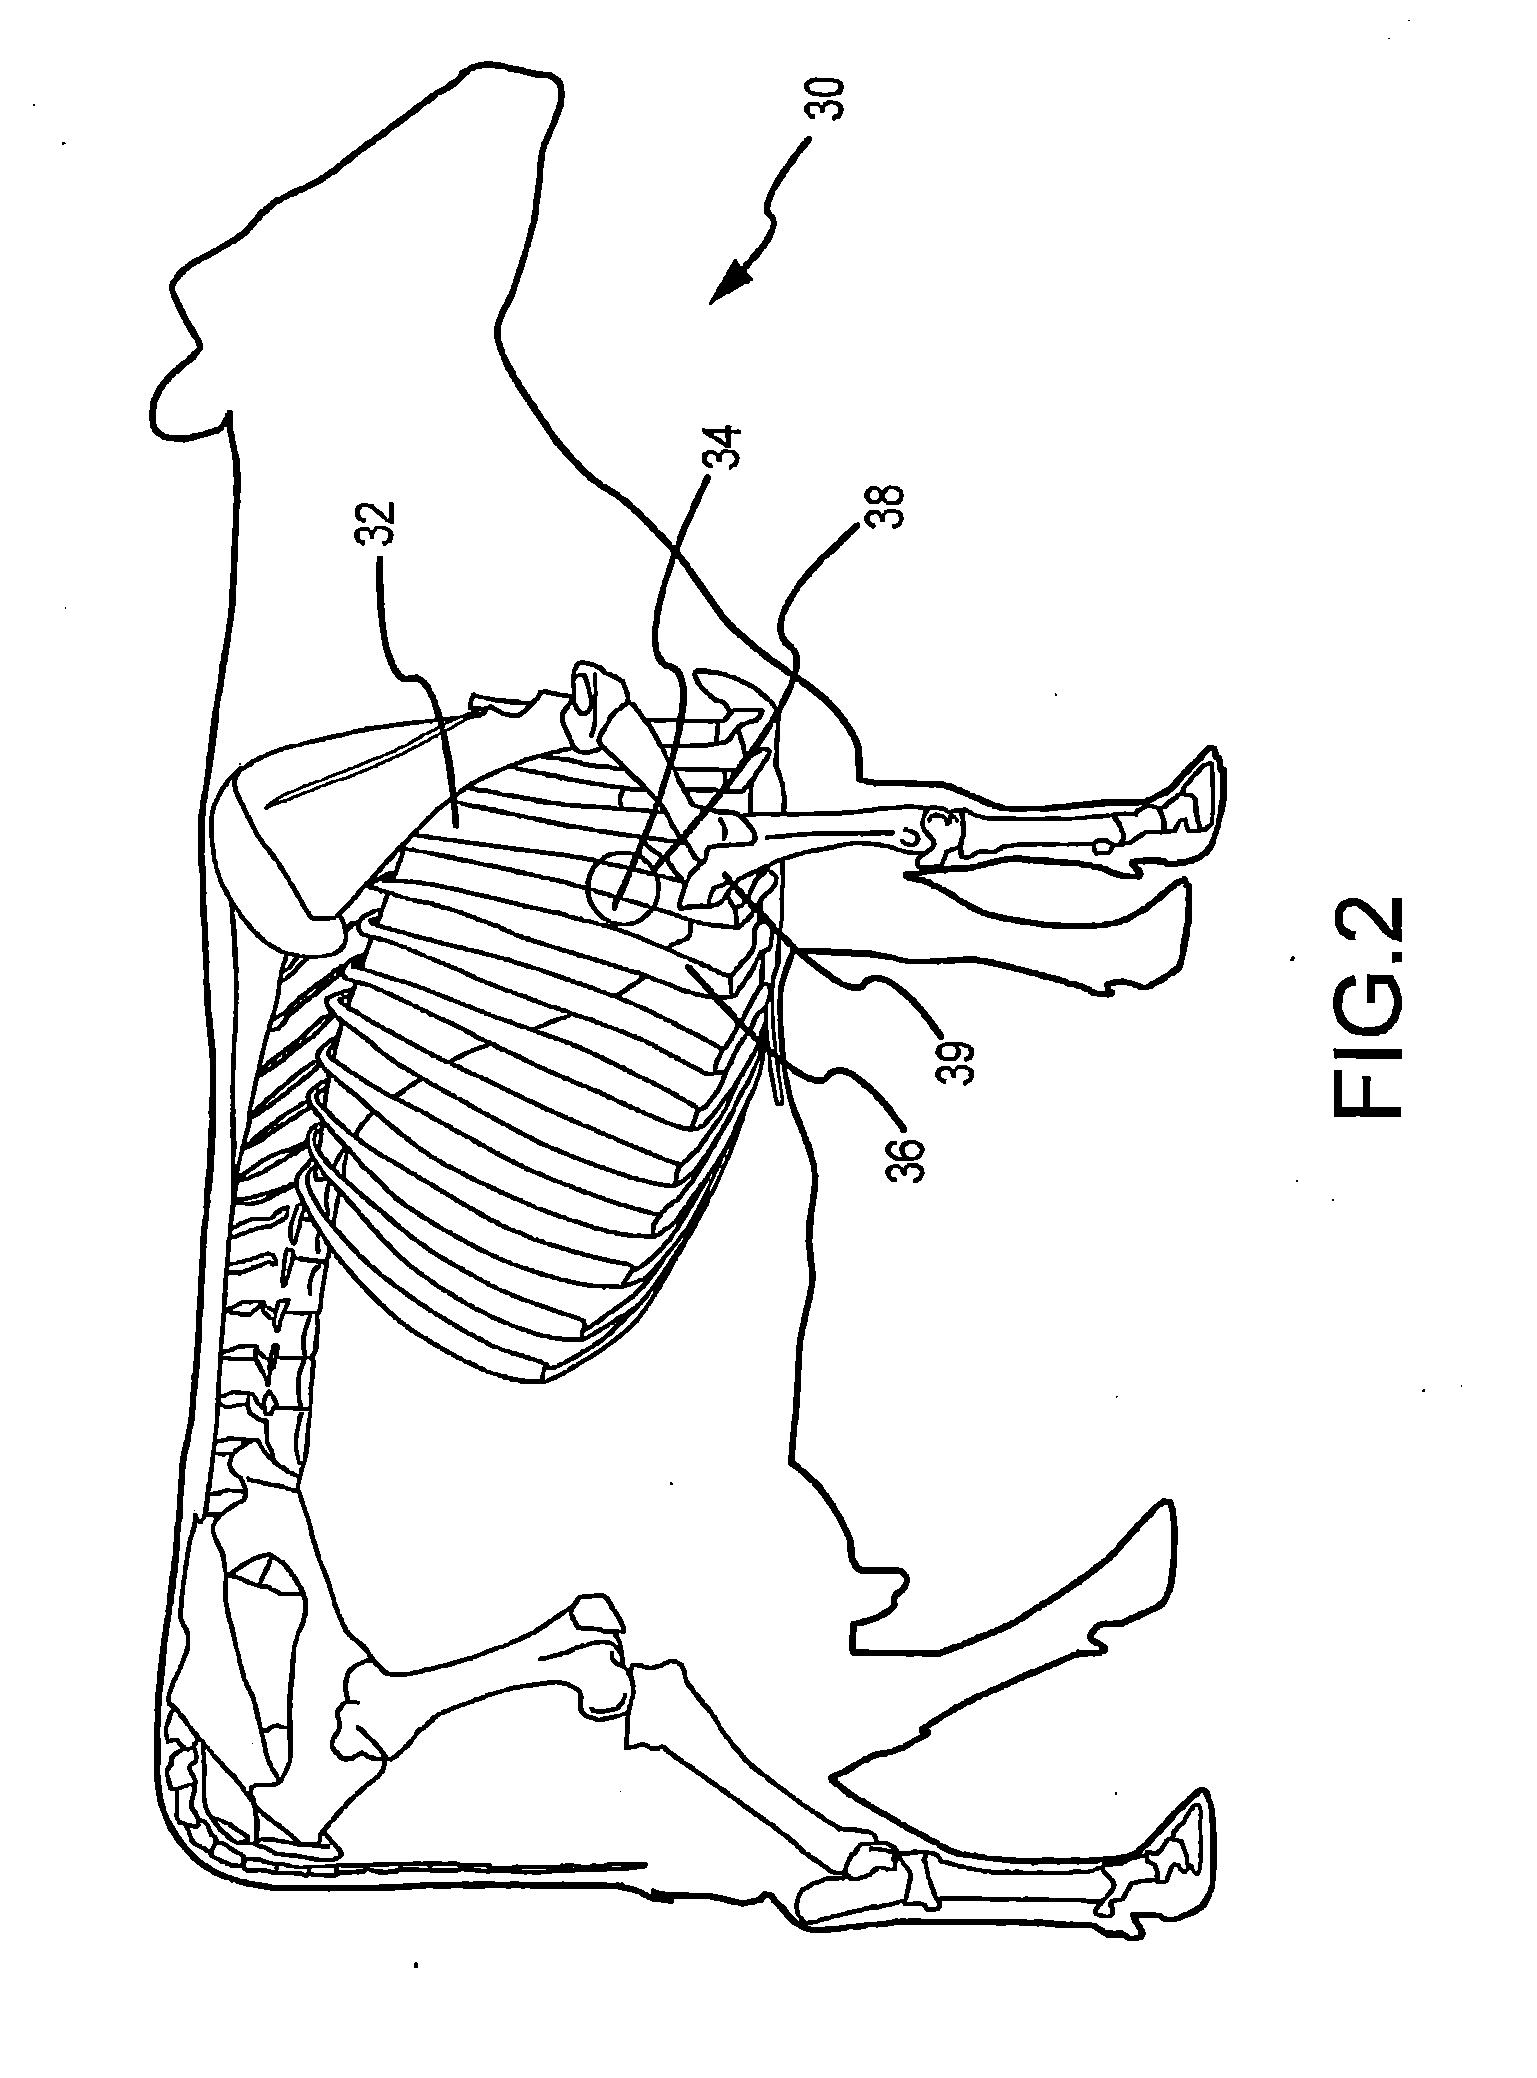 System and method for diagnosis of bovine diseases using auscultation analysis